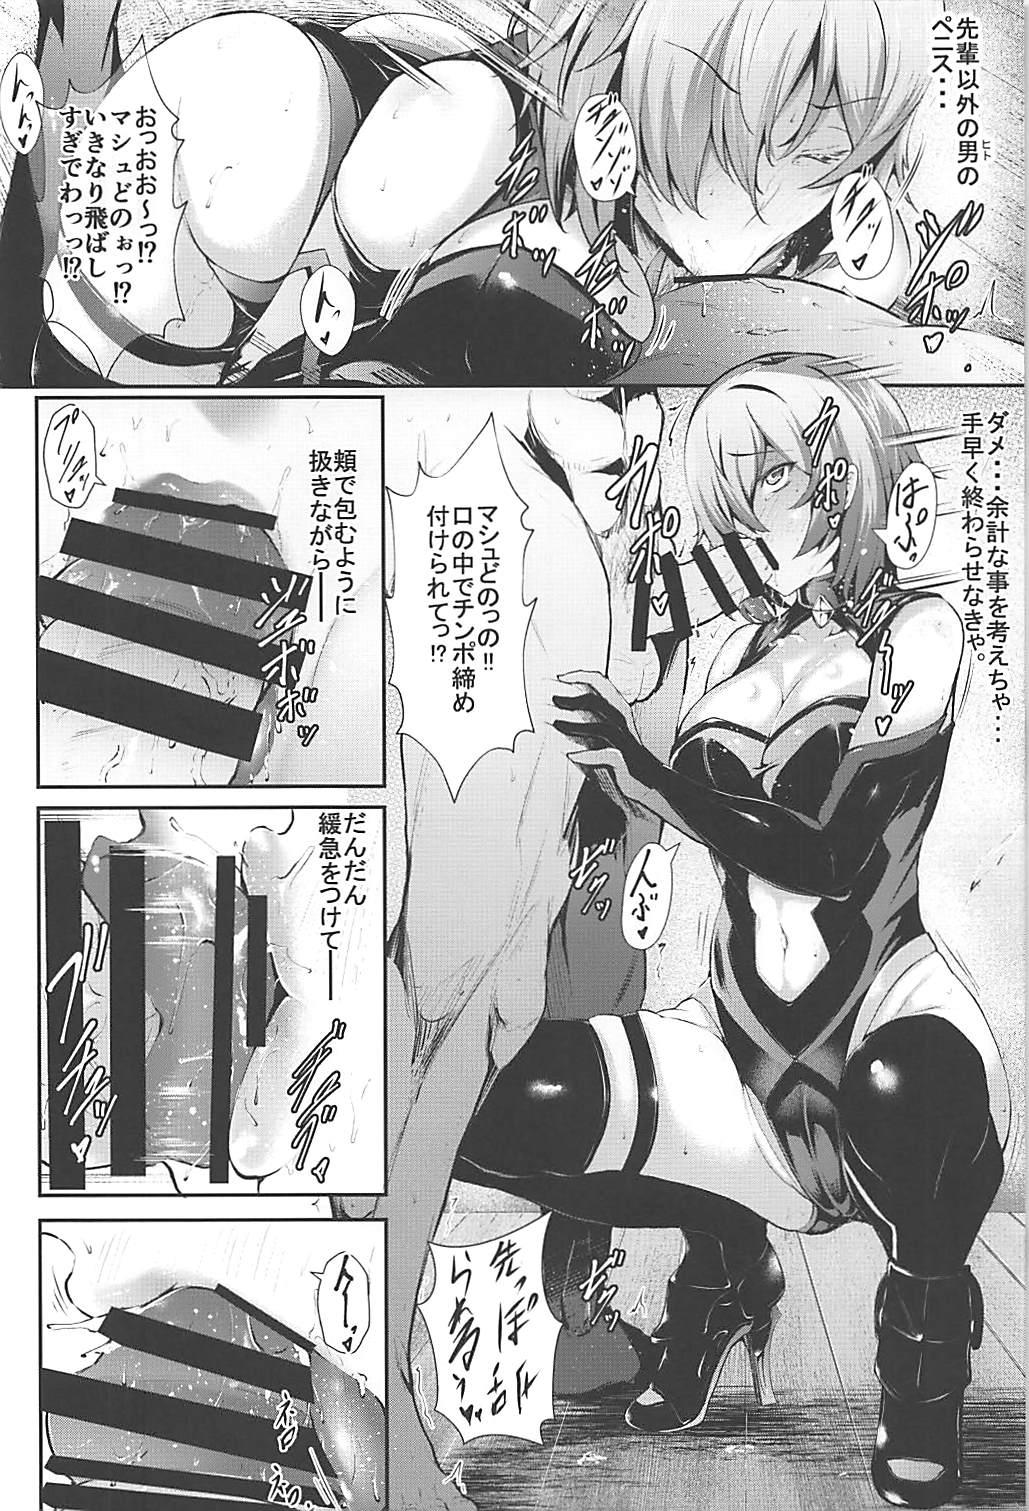 Butt Sex Nympho-mania? - Fate grand order Amateurs - Page 7